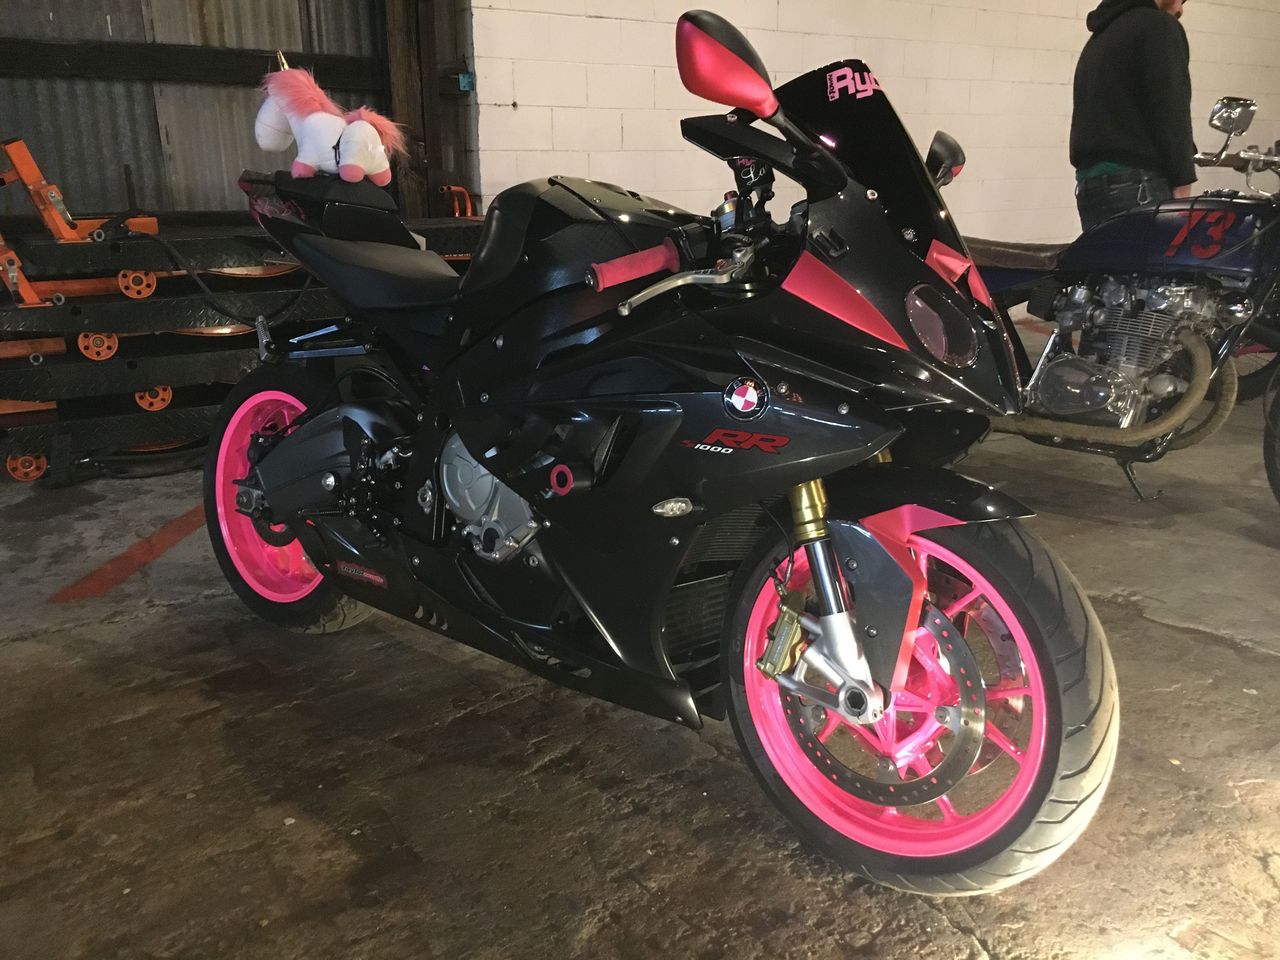 This 2010 S1000RR has aesthetic mods as well as a full Taylormade Exhuast system. One of if not the nicest out-of-the-box exhausts available to the public